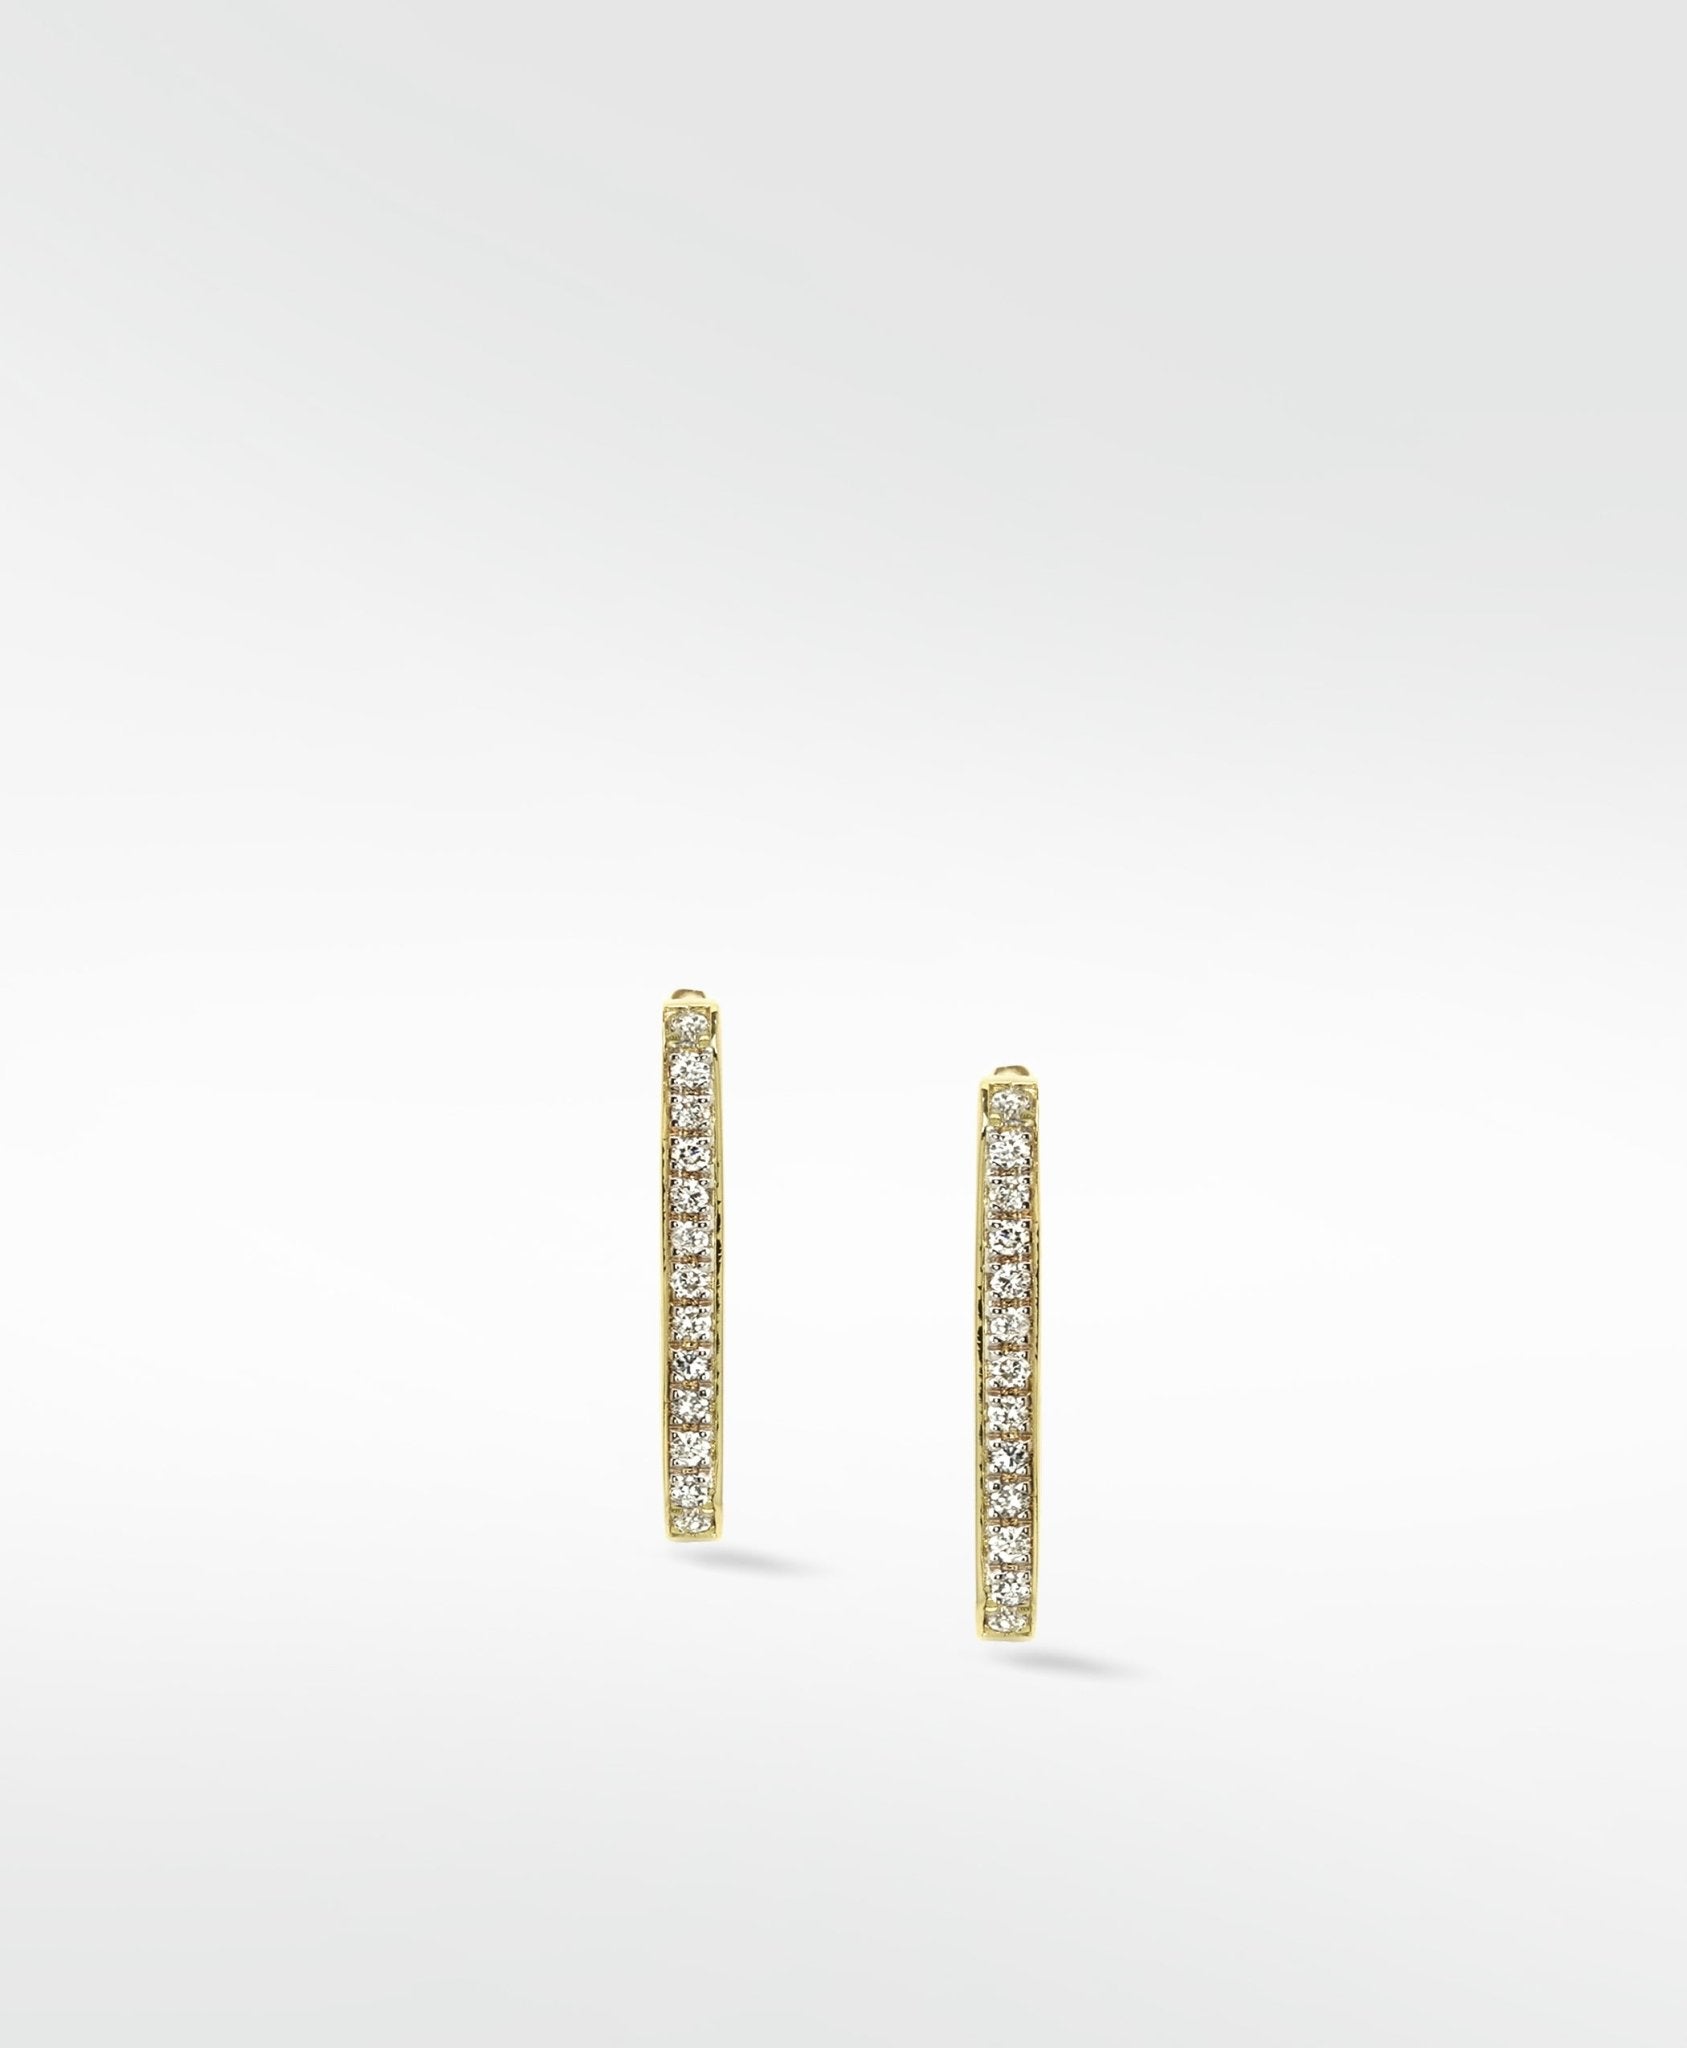 Eclipsis Diamond Hoop Earrings with Mother of Pearl and Onyx in 18k Yellow Gold - Lark and Berry